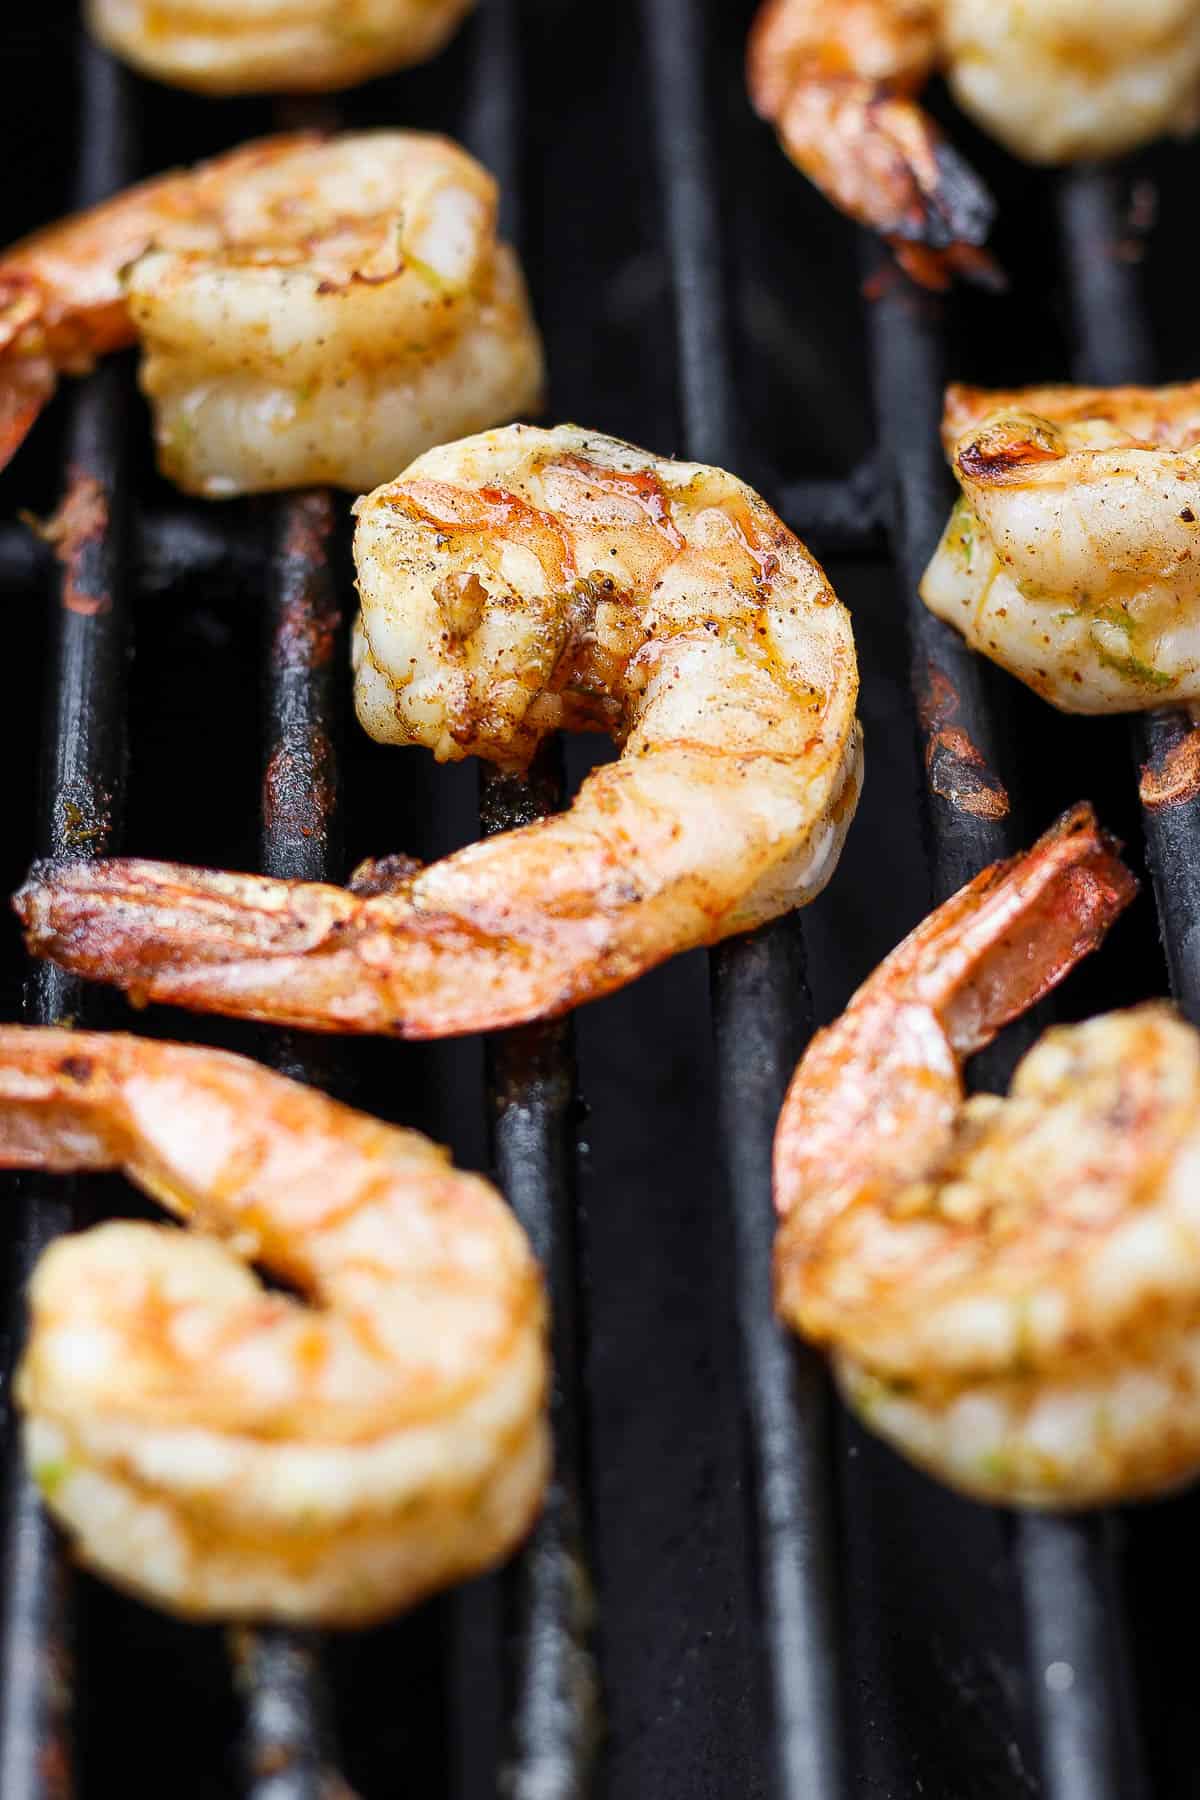 Chili lime shrimp cooking on the grill grates.